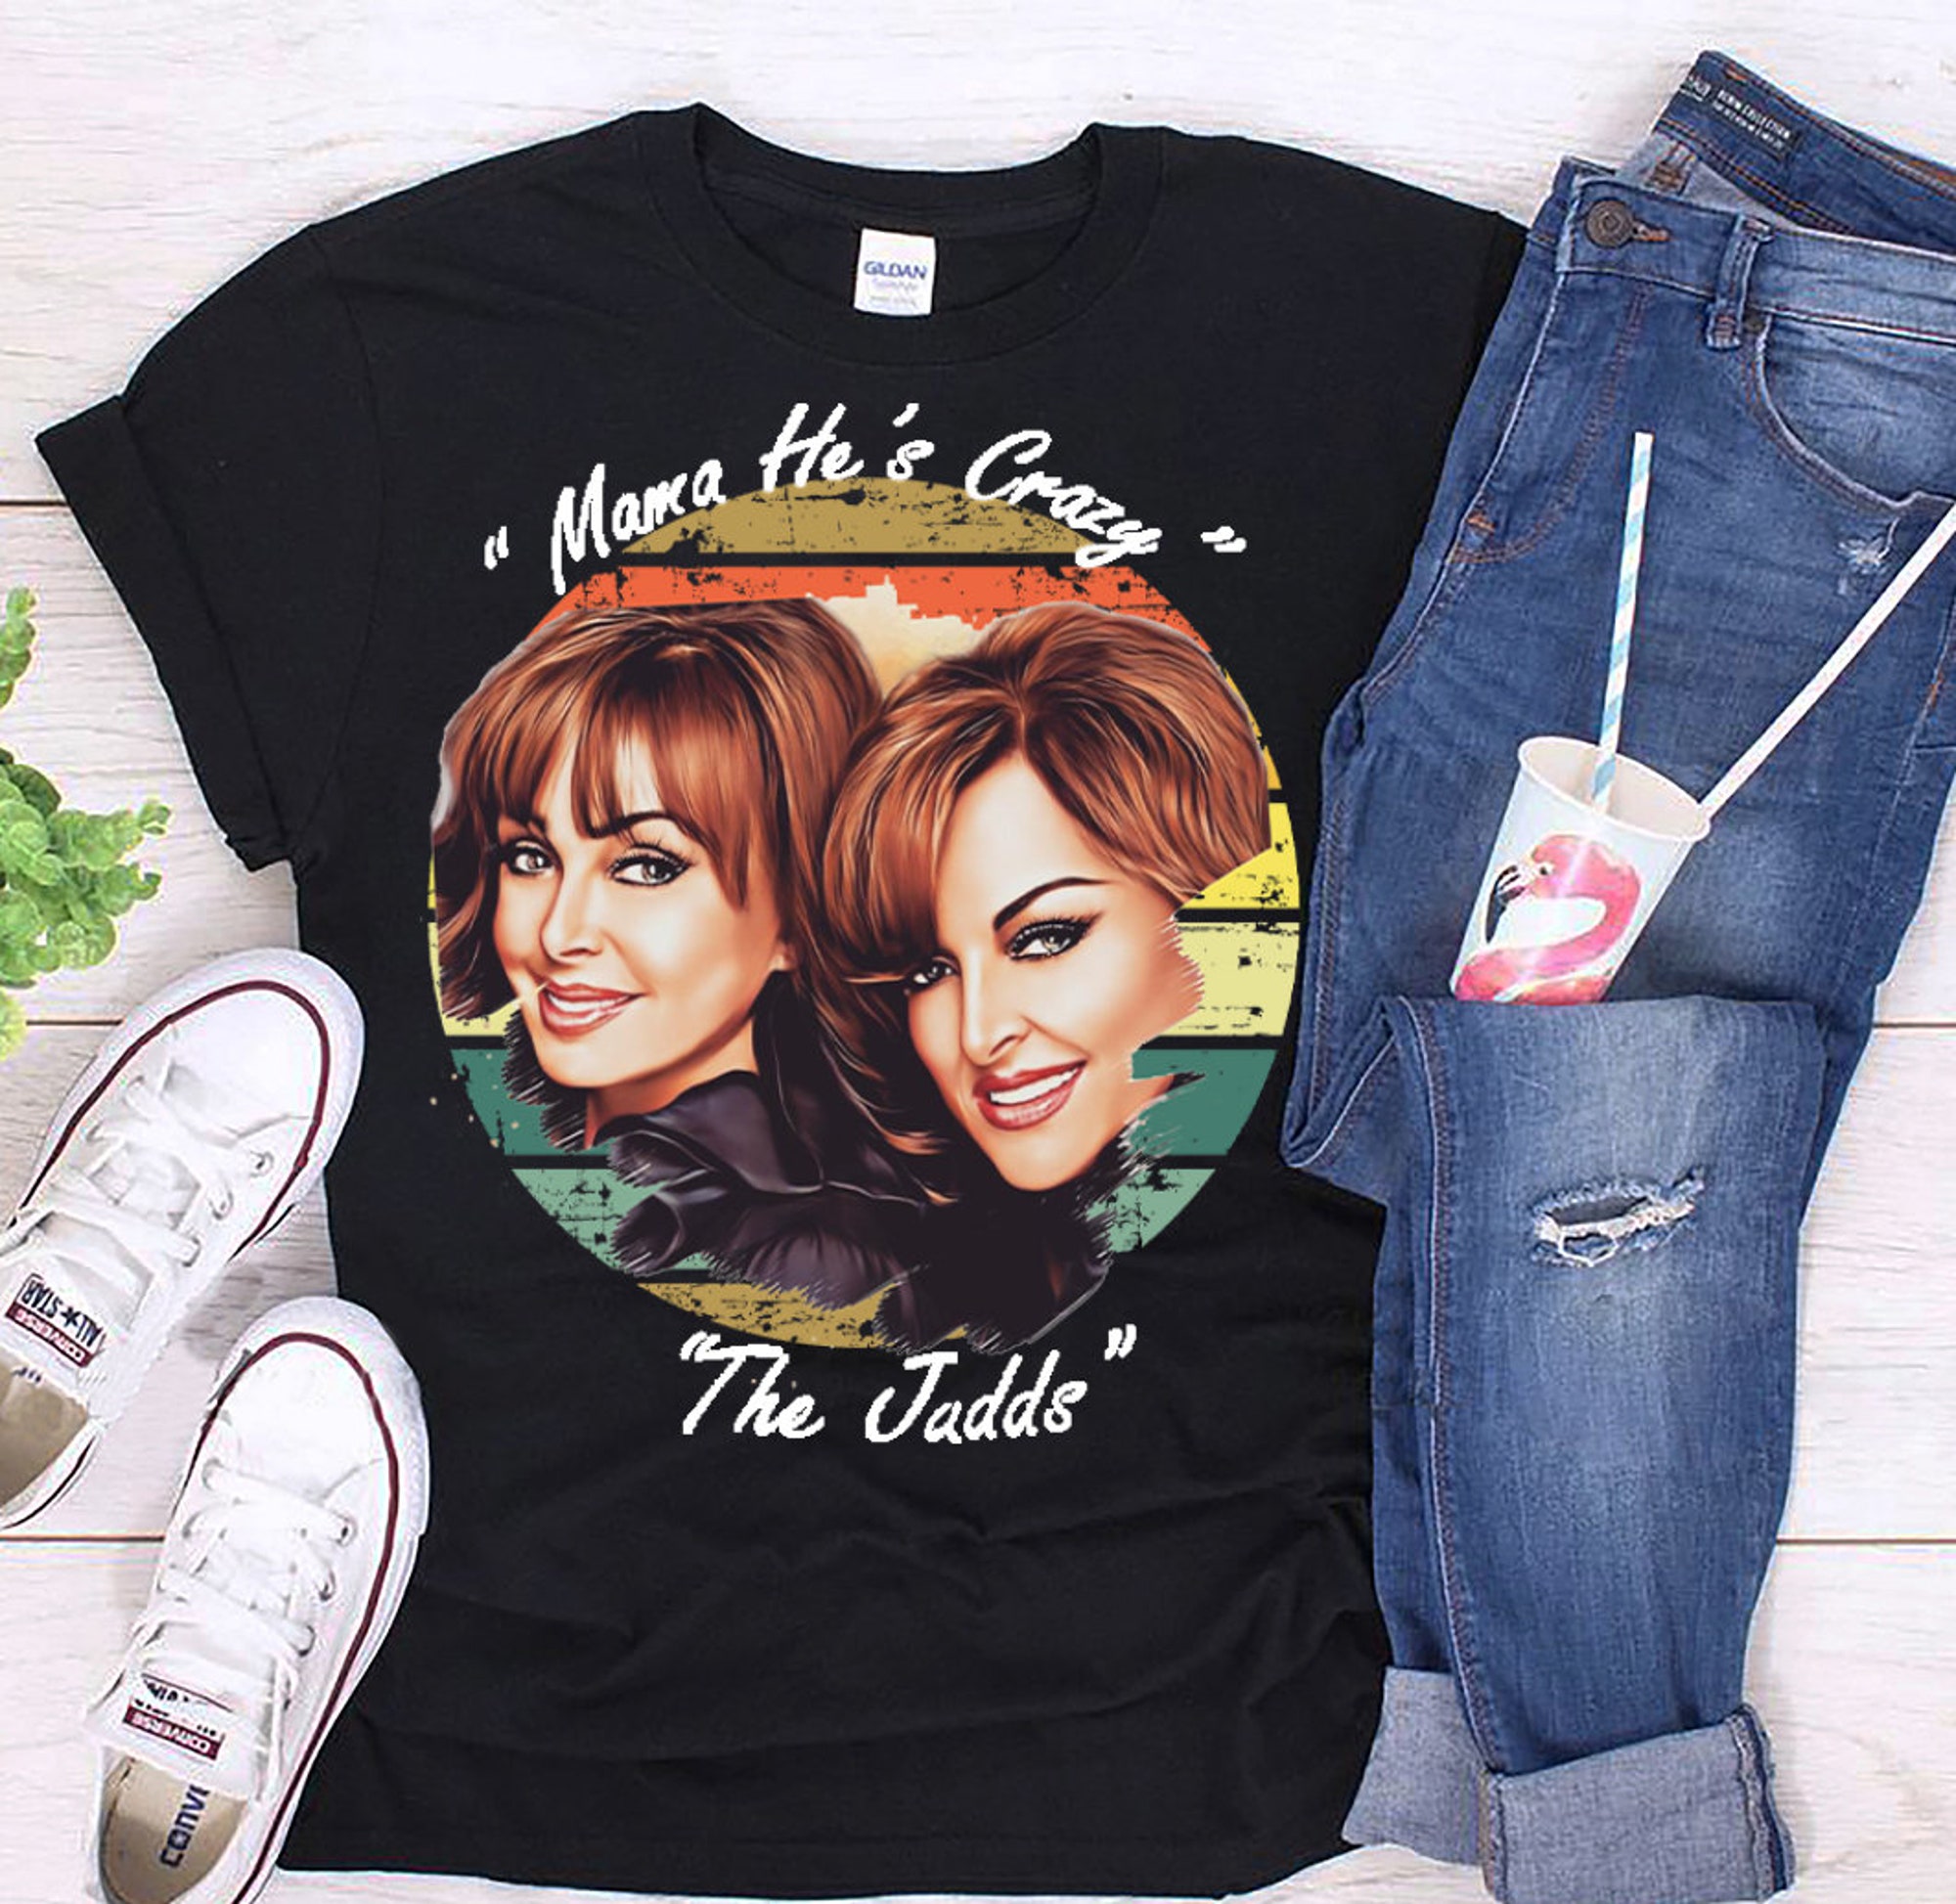 Discover Mama his crazy The Judds T-shirt